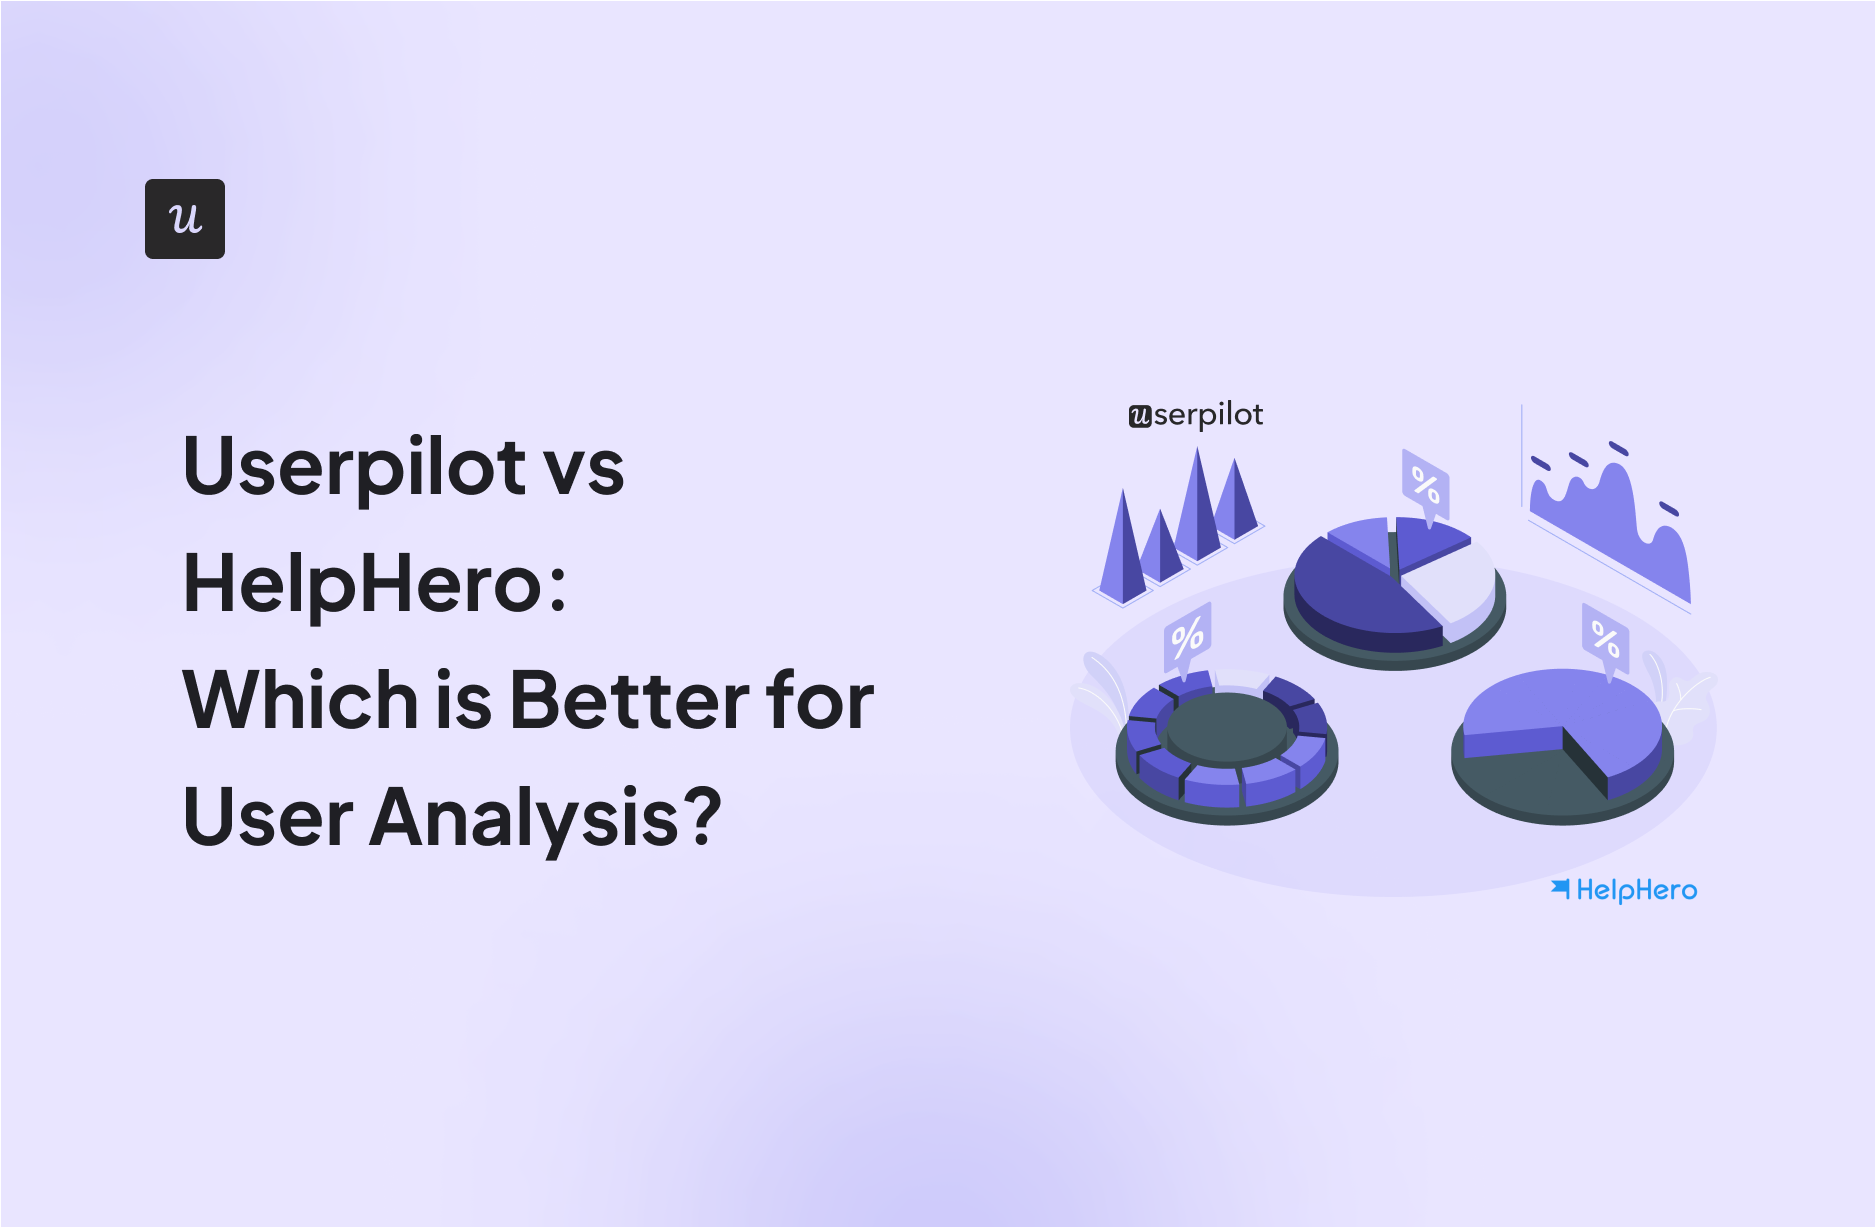 Userpilot vs HelpHero: Which is Better for User Analysis?